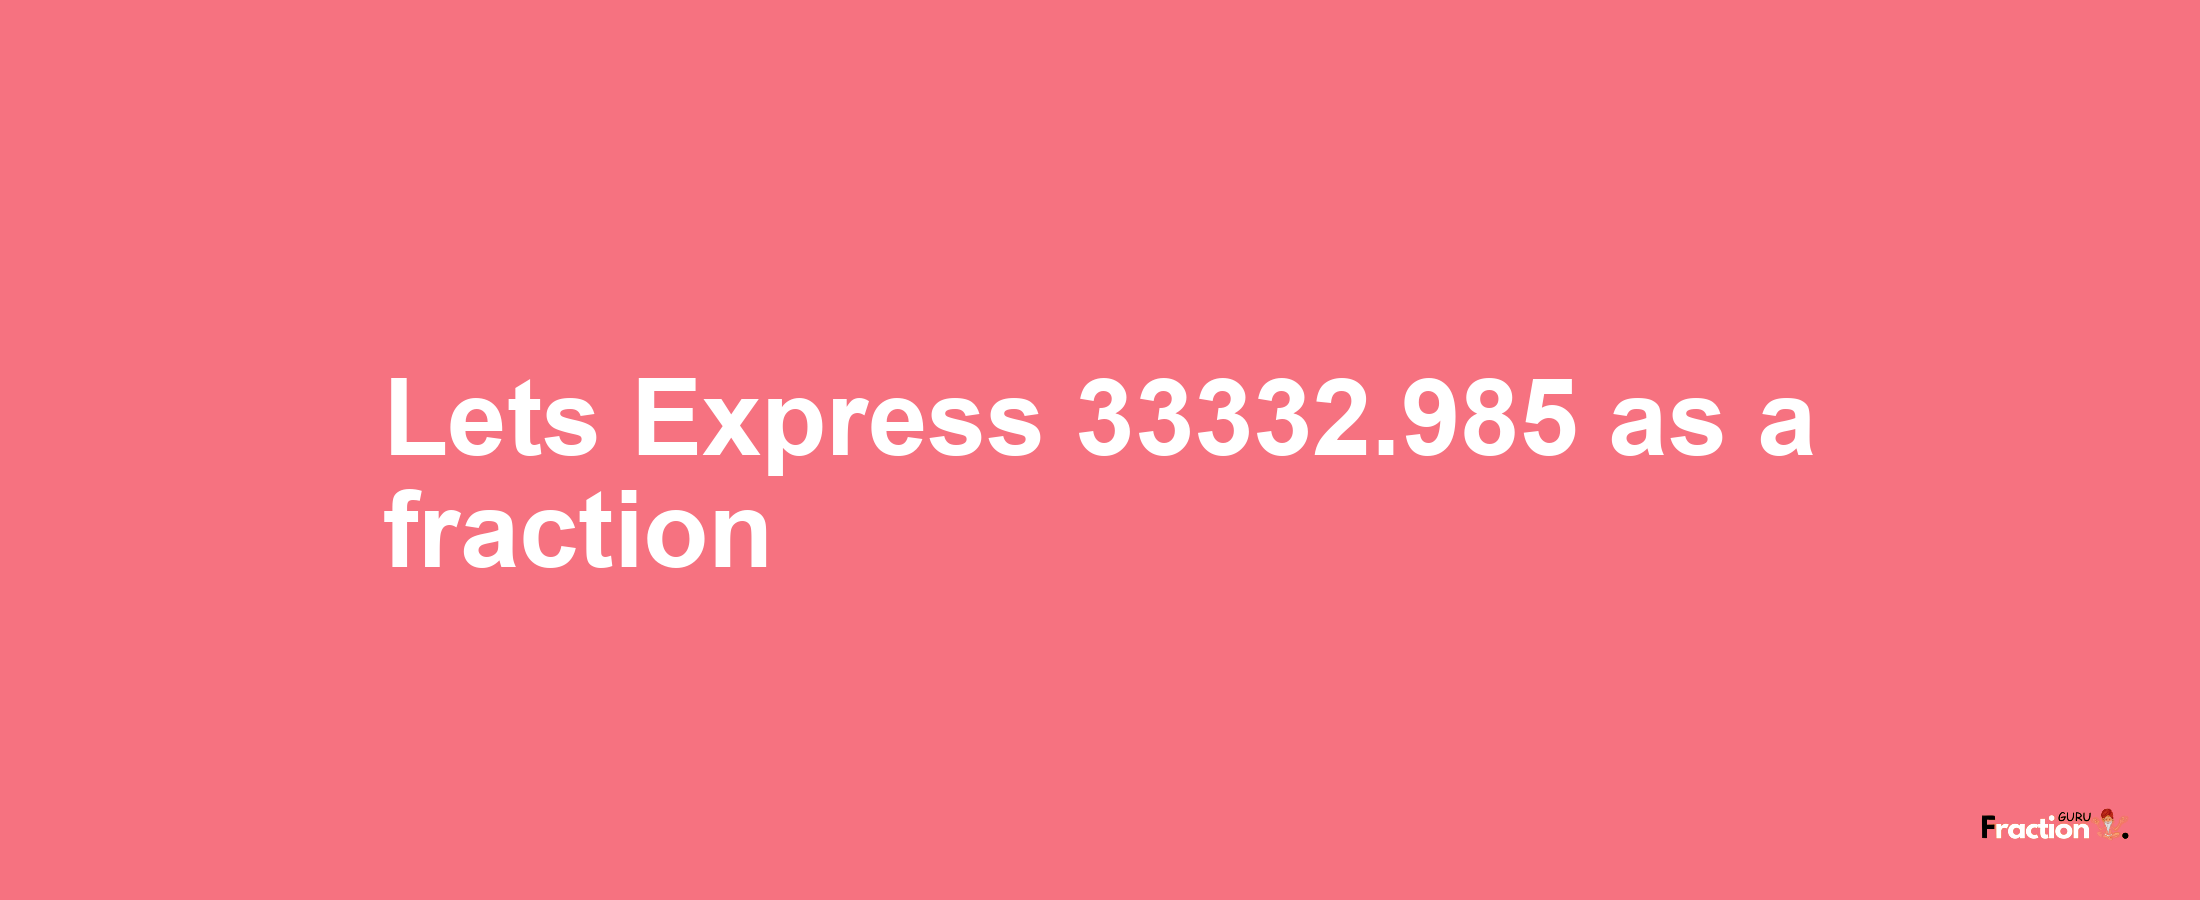 Lets Express 33332.985 as afraction